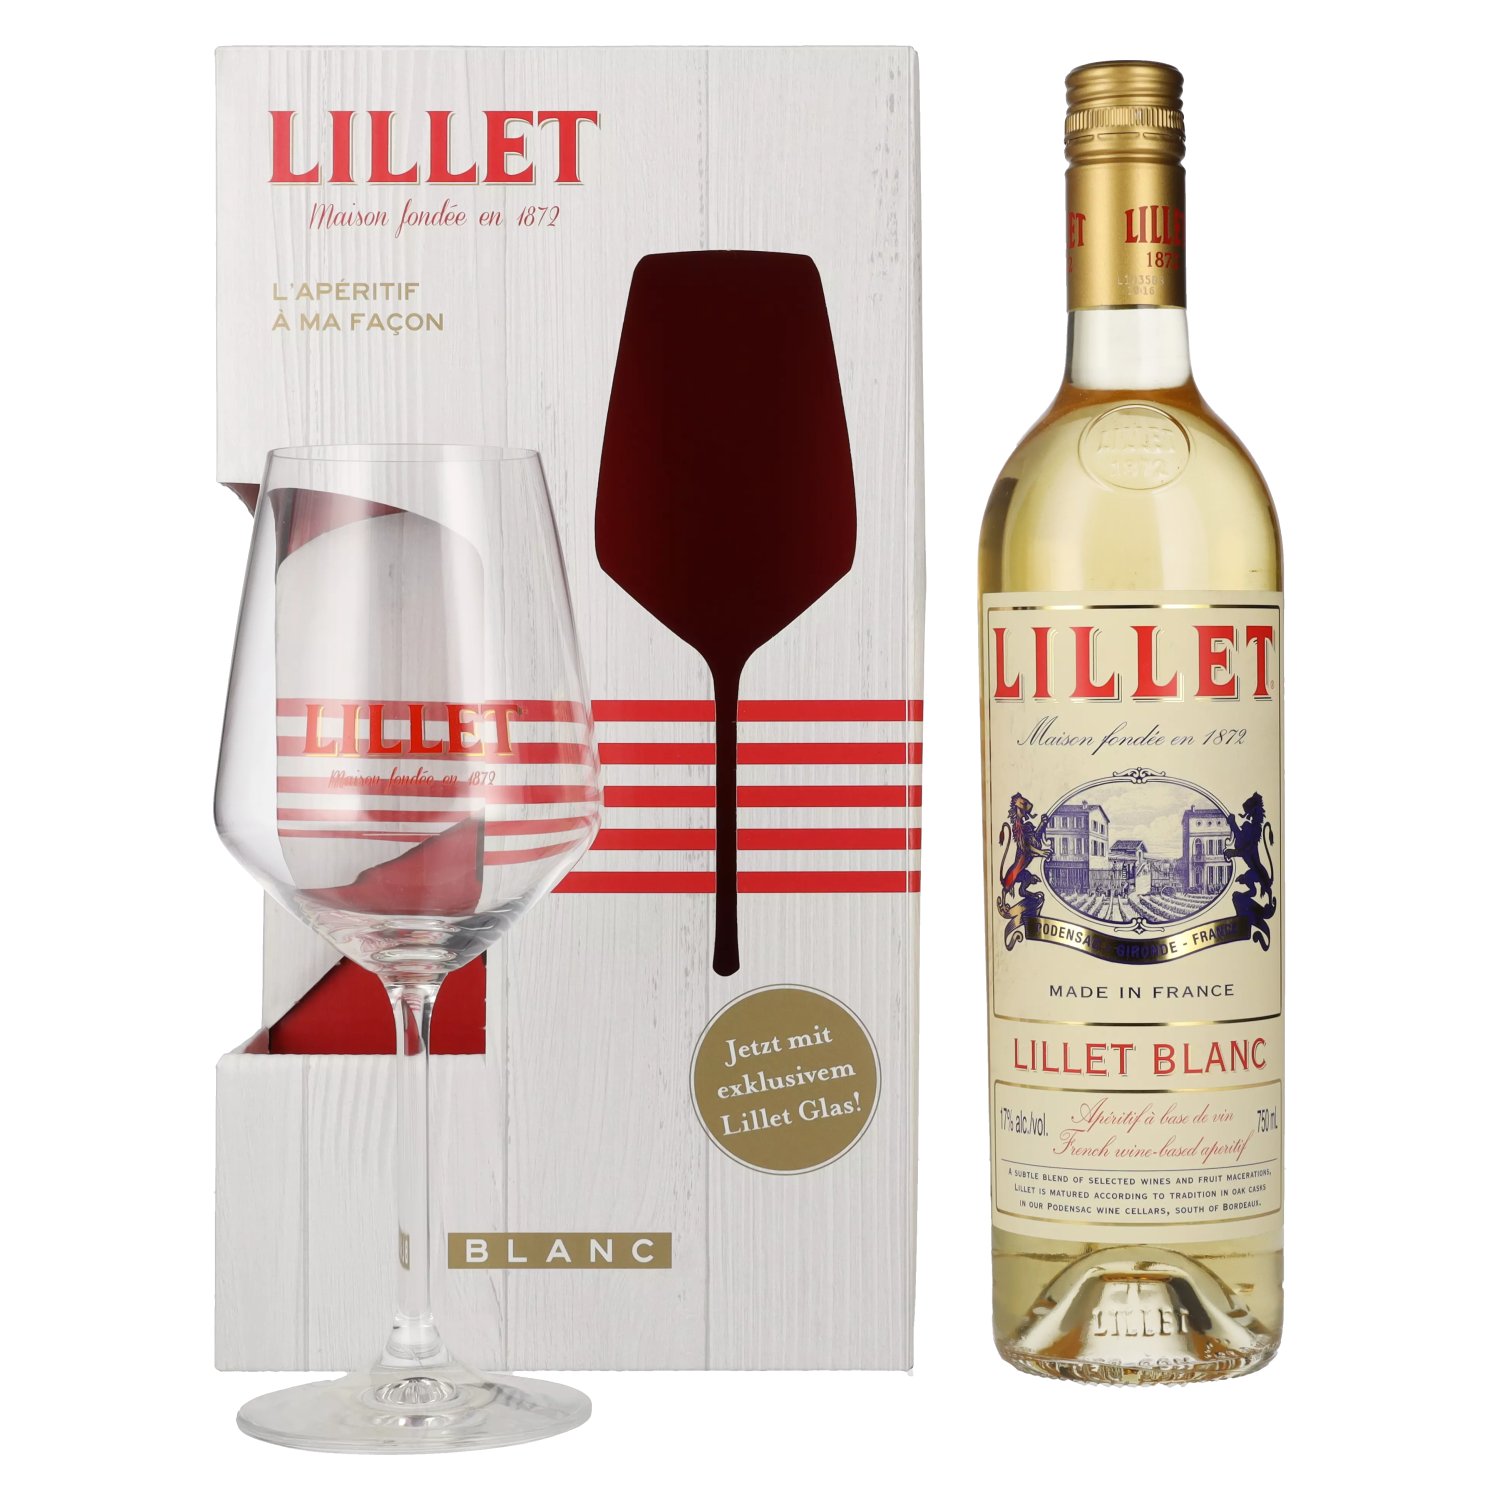 glass Blanc Vol. in 17% Giftbox 0,75l Lillet with